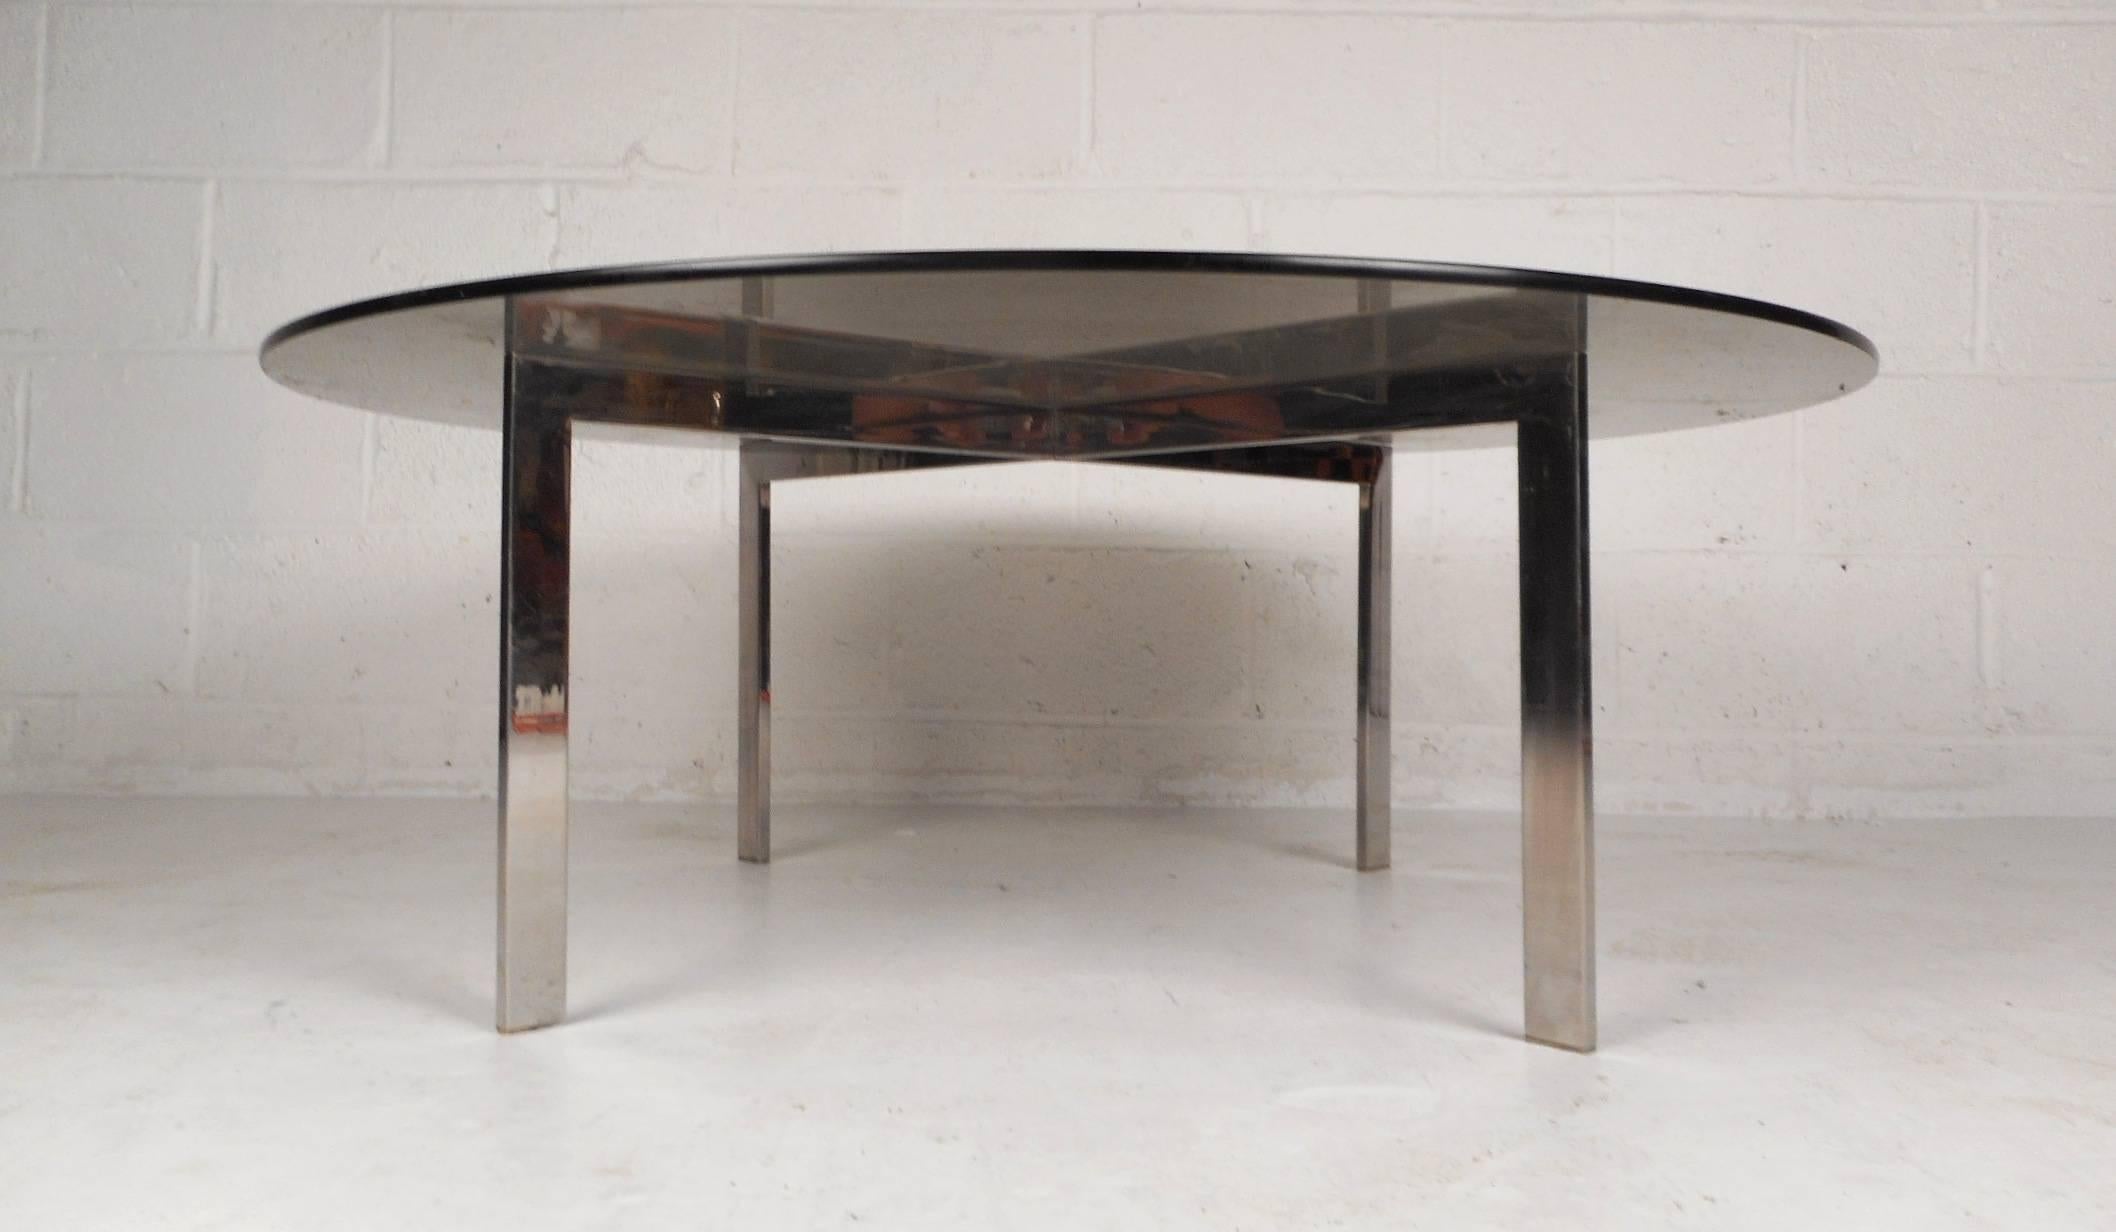 This beautiful vintage modern coffee table features a unique flat bar chrome base with a round glass top. The sleek design has a thick glass top with a smokey tint sitting on top of a heavy "X" shaped chrome base. This wonderful midcentury